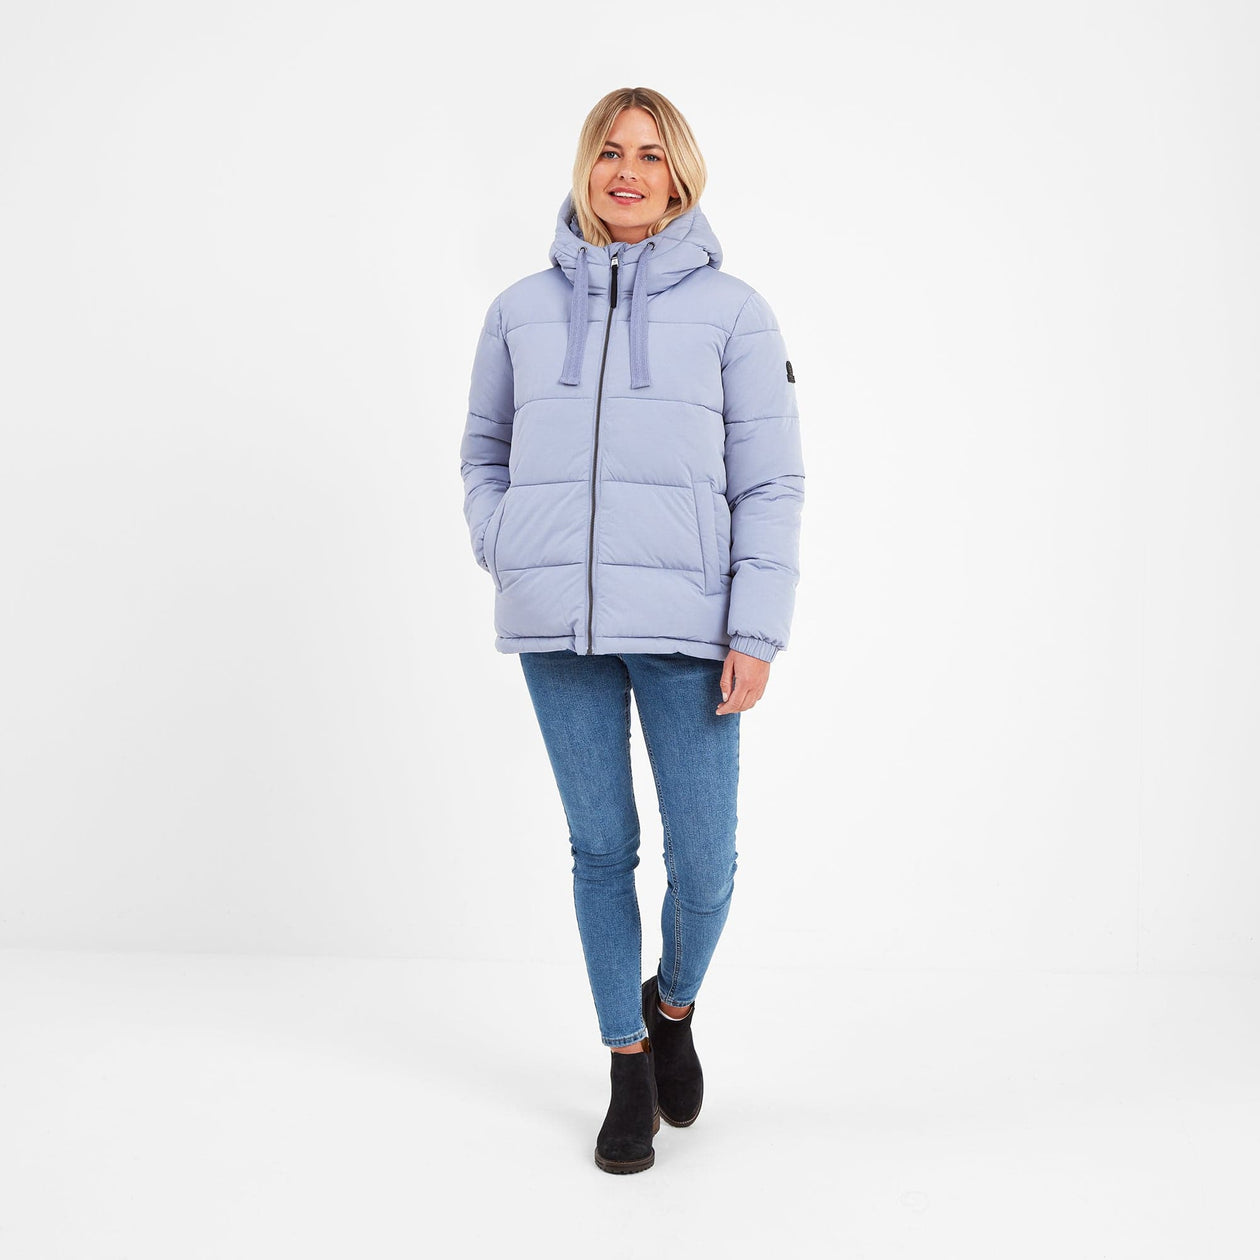 Nostell Womens Thermal Jacket - Dusty Blue image 4